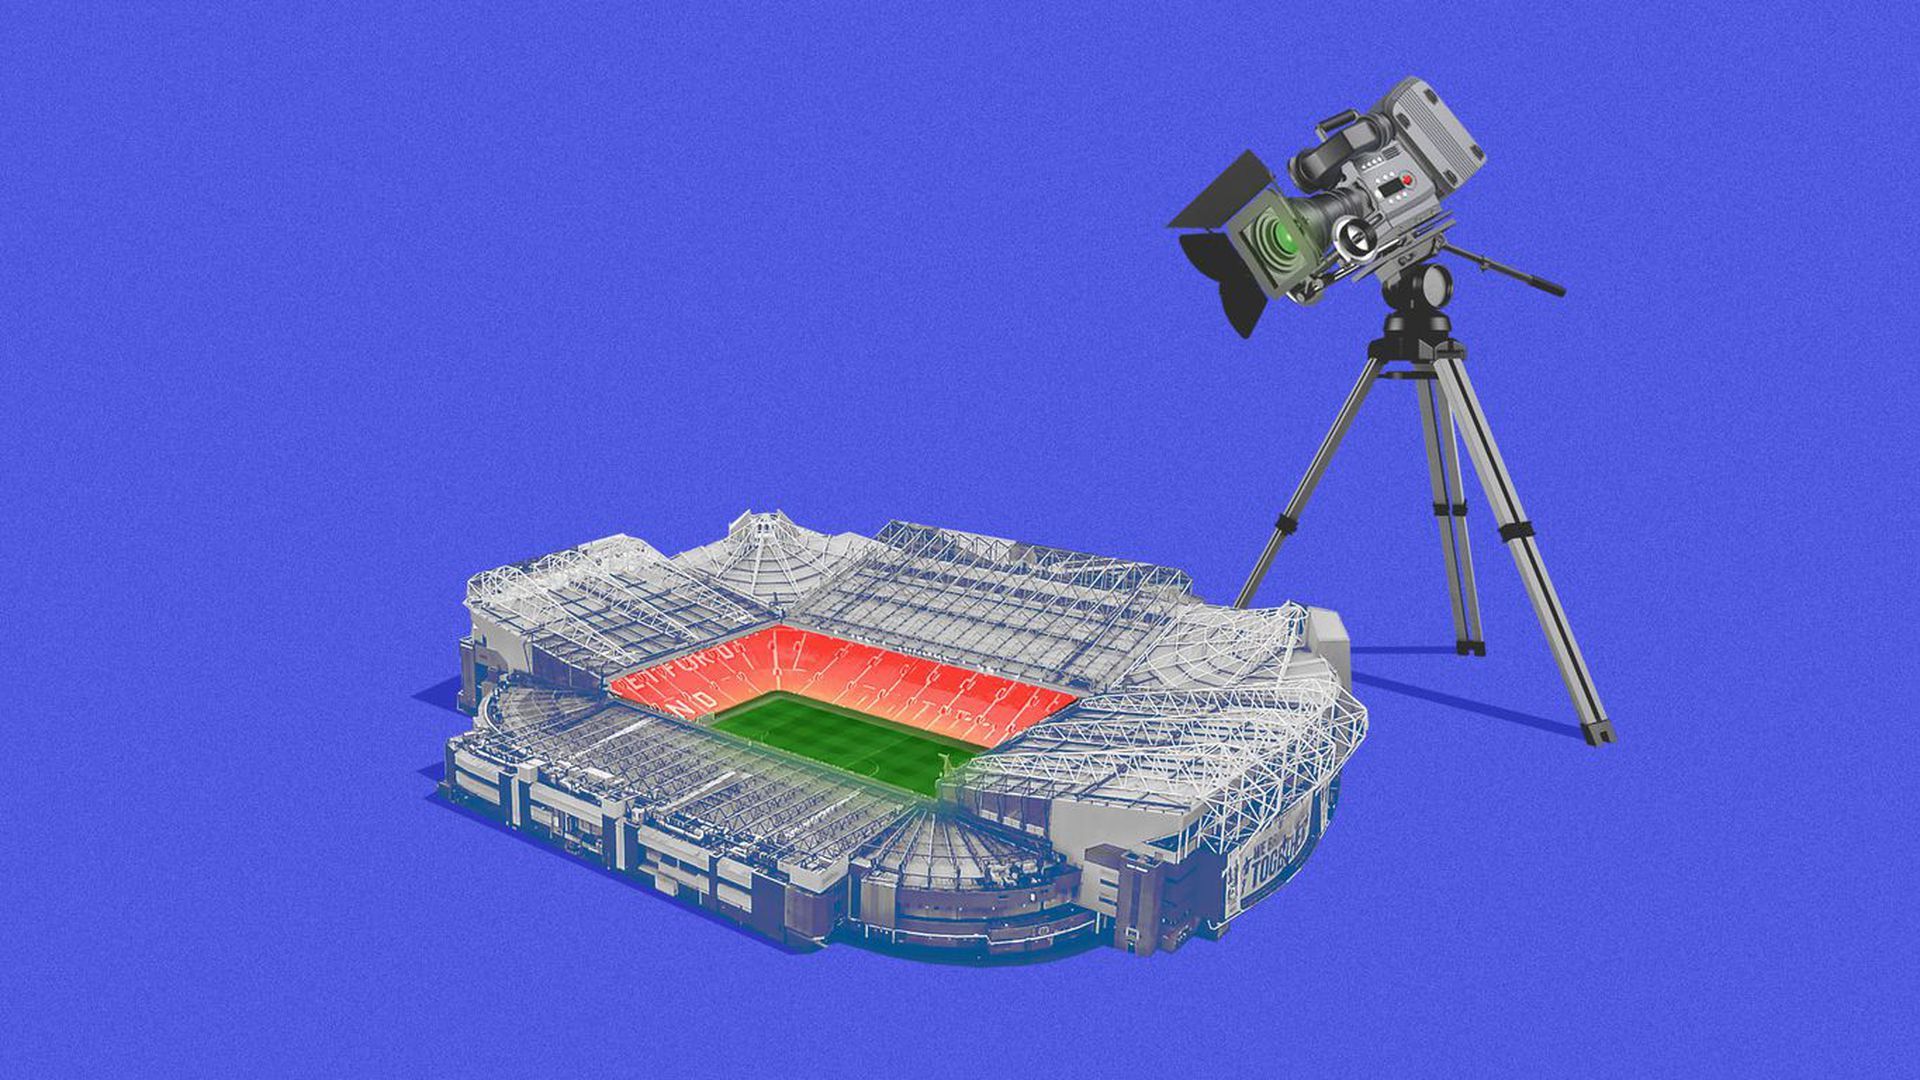 A camera pointed at a stadium.